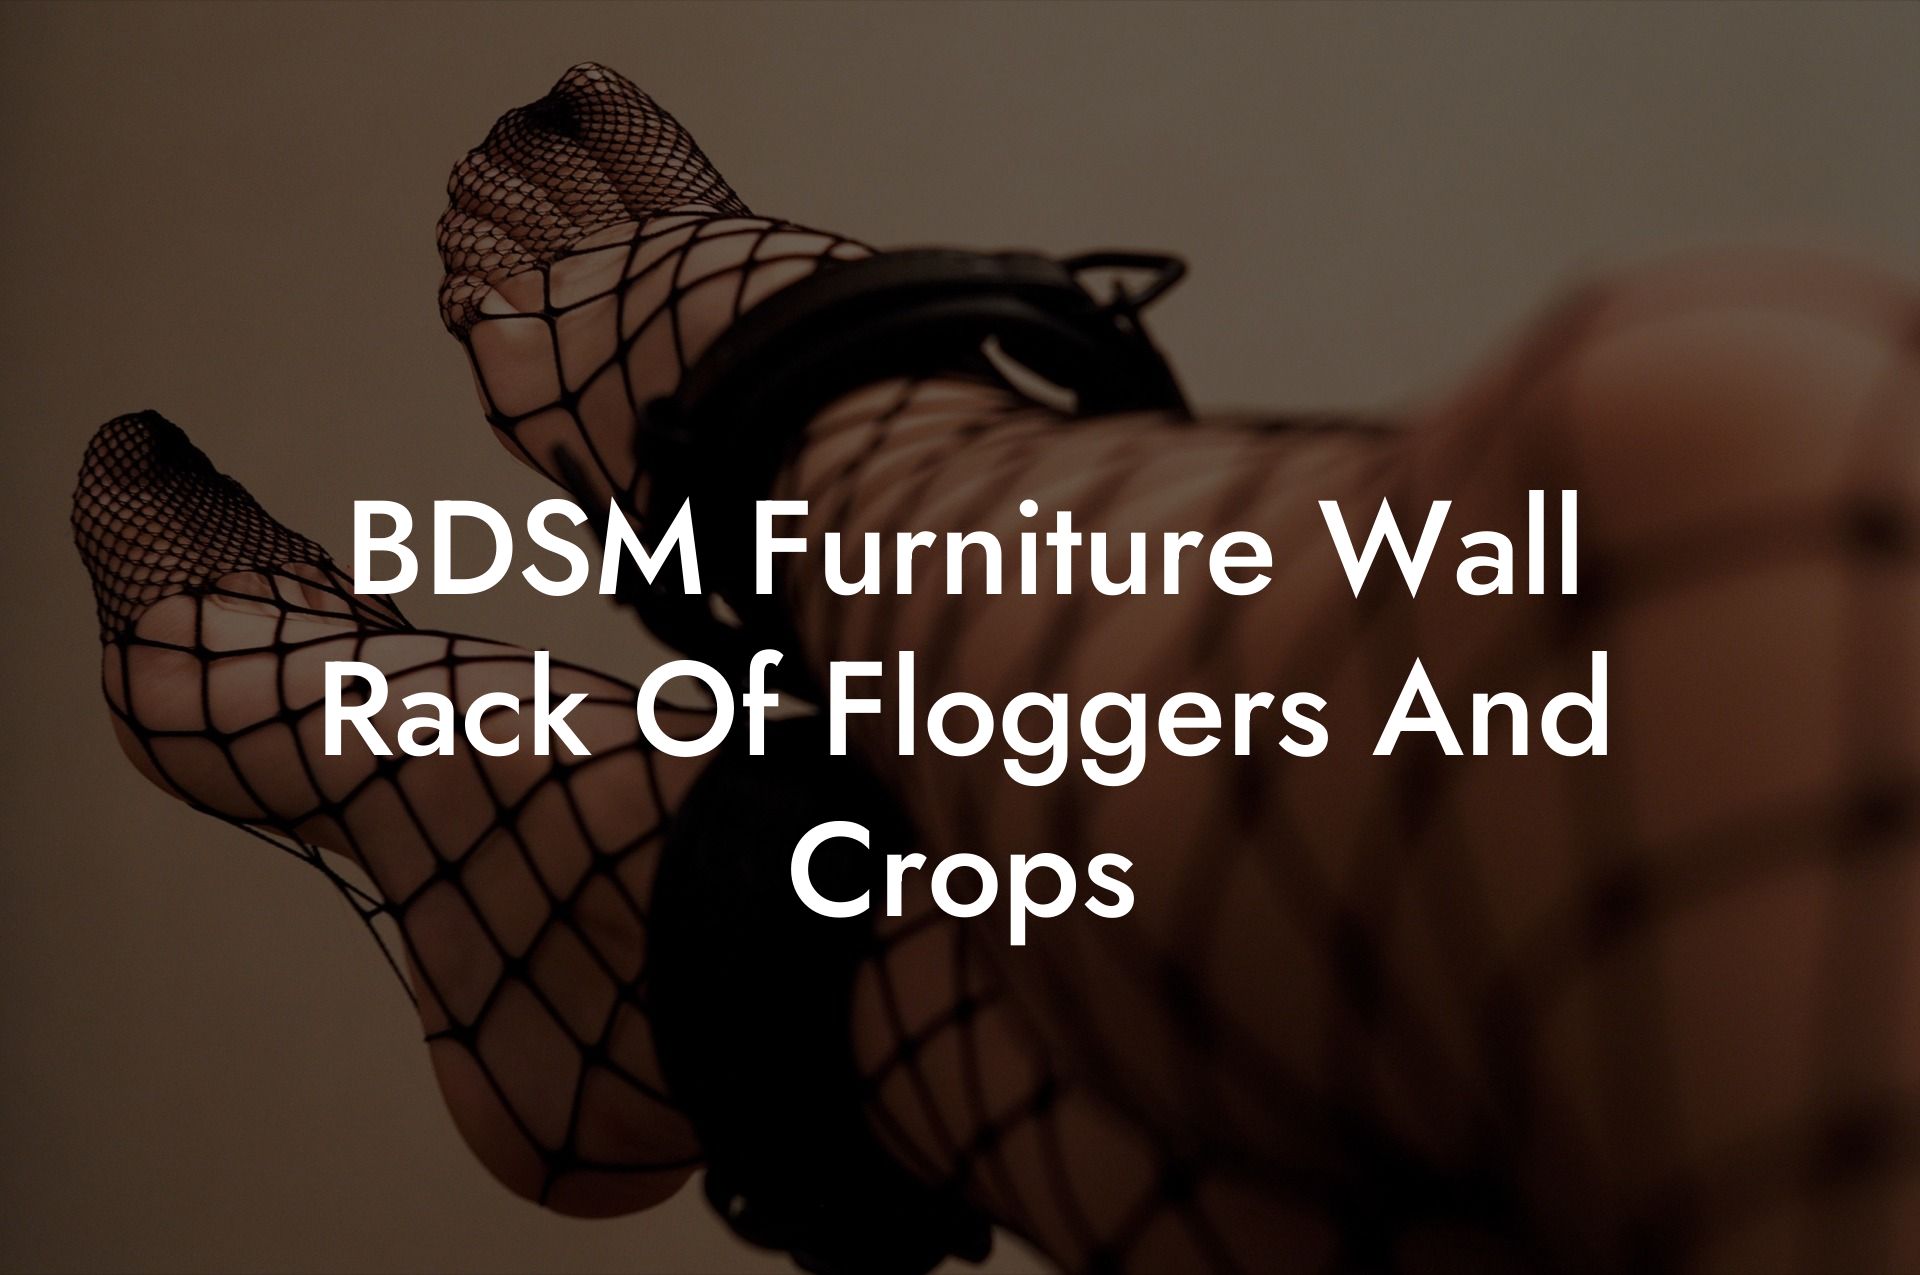 BDSM Furniture Wall Rack Of Floggers And Crops